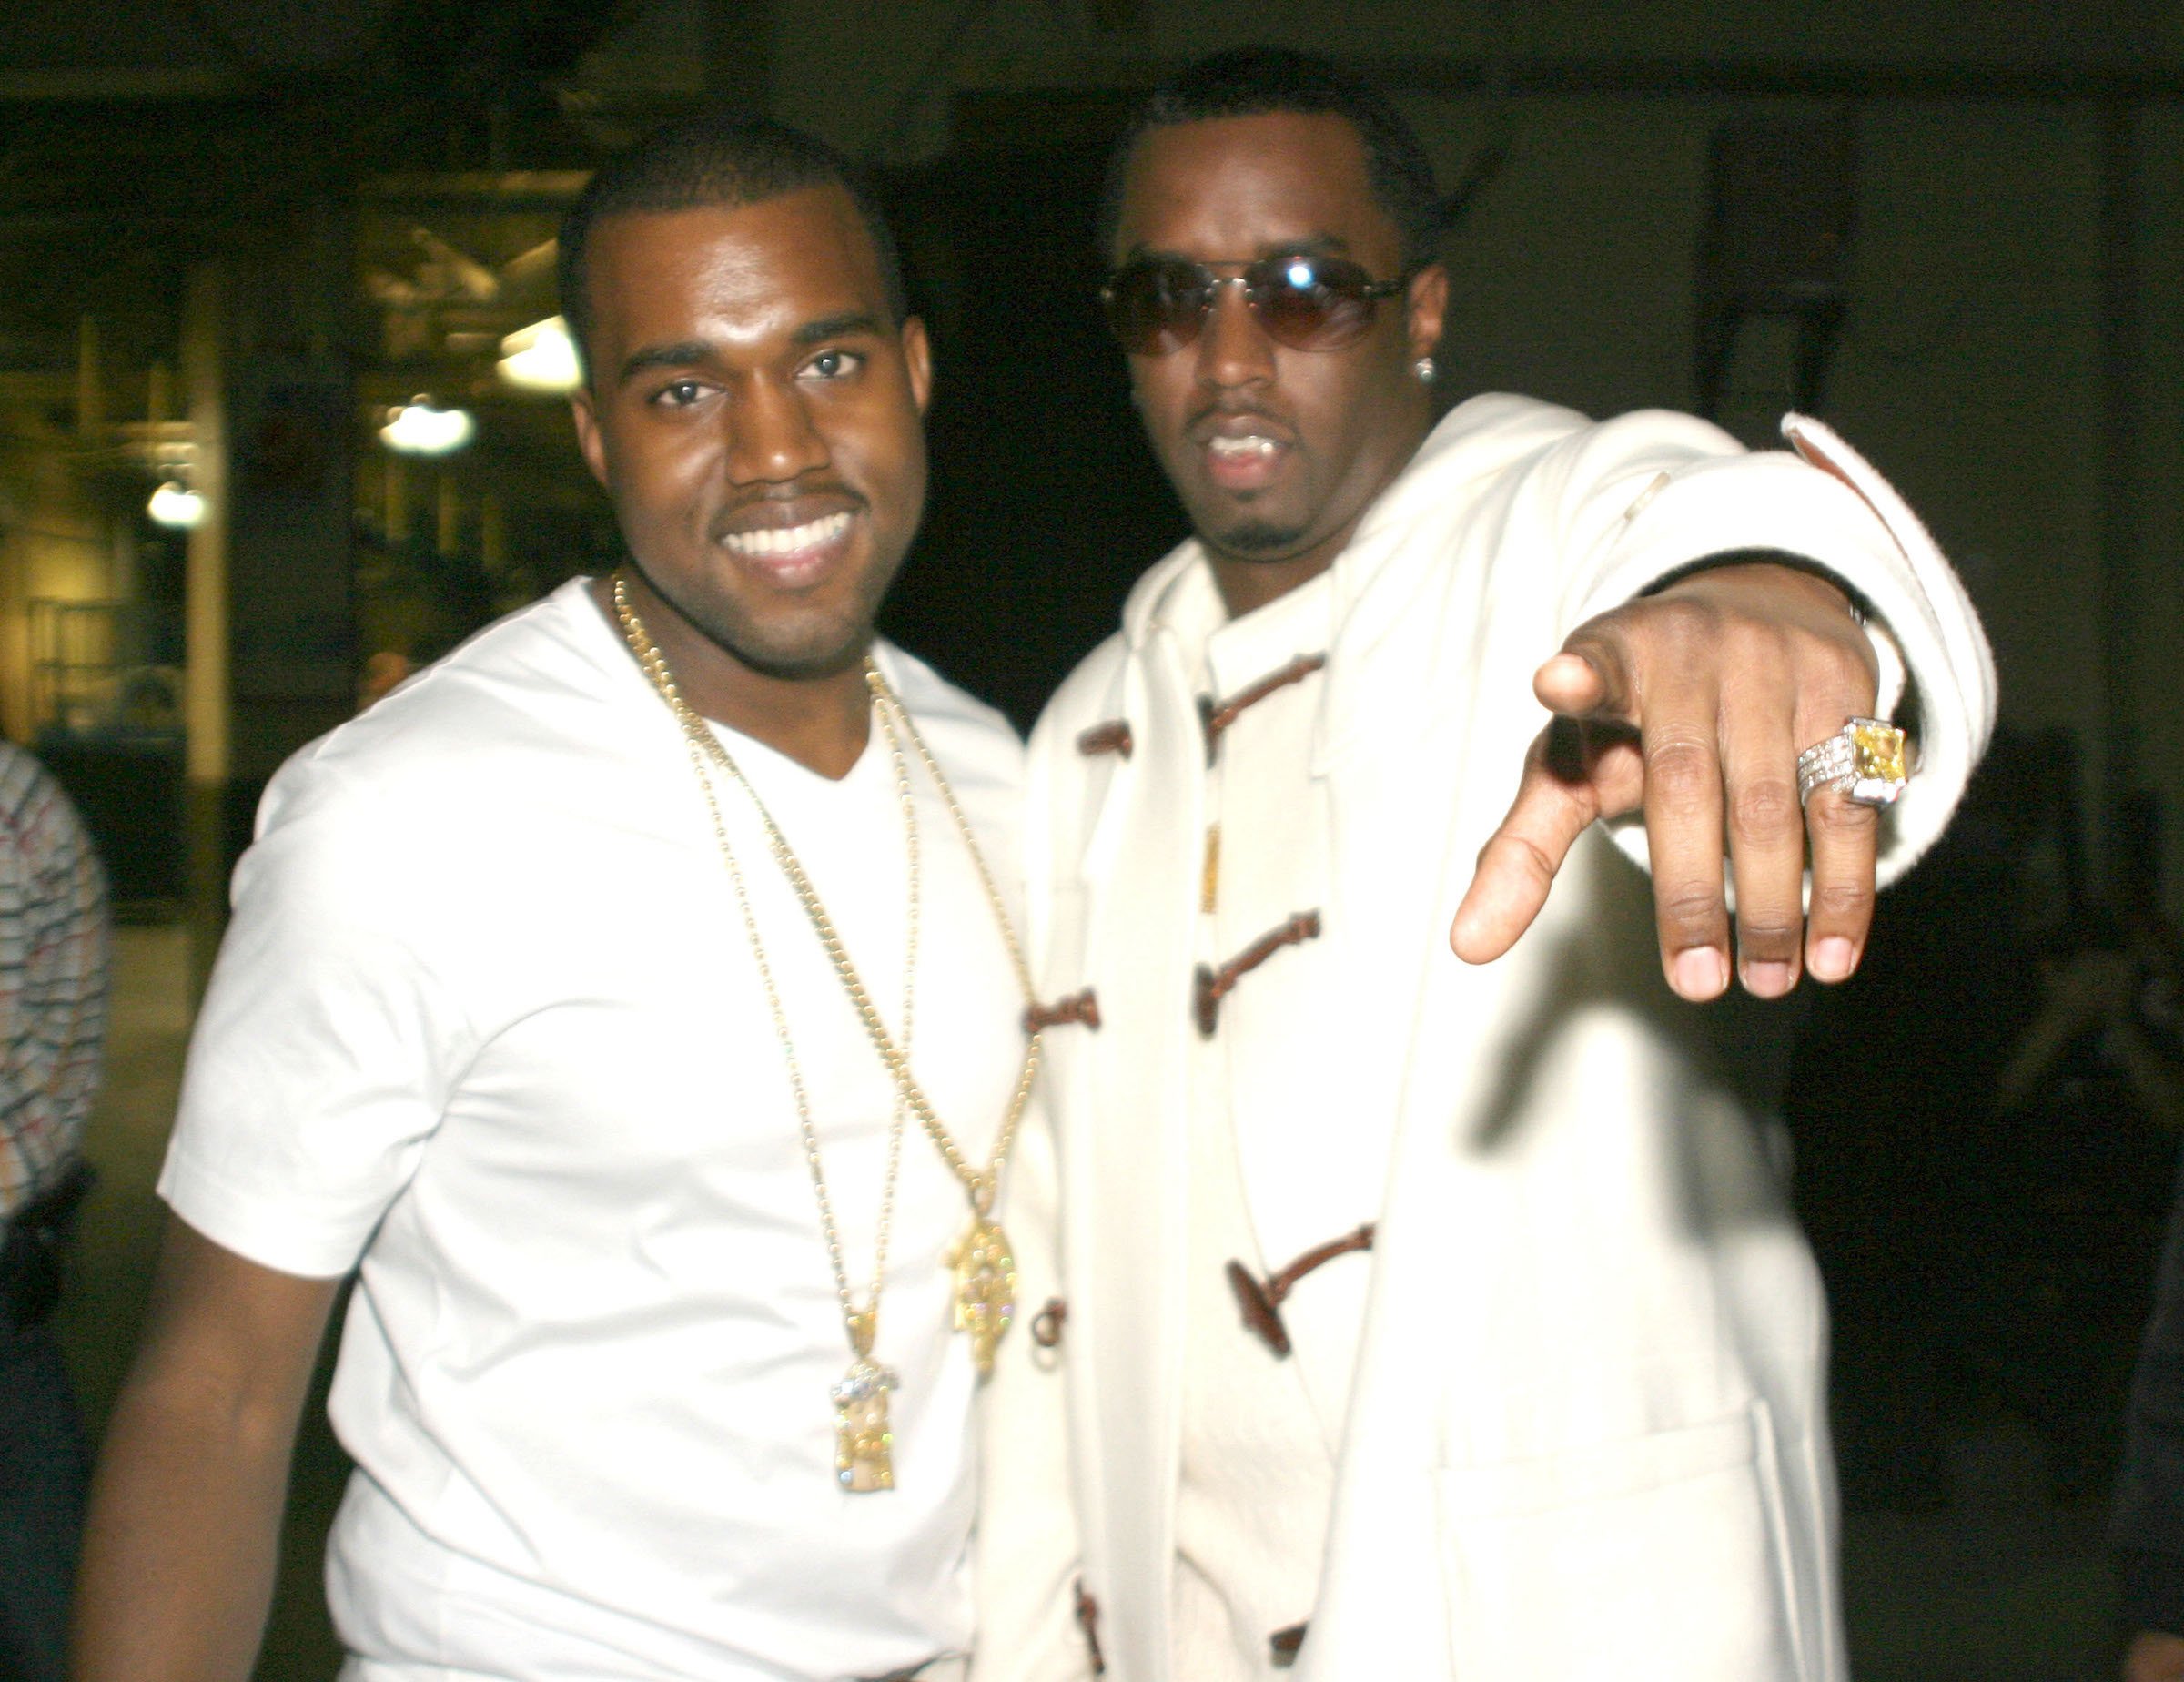 Kanye West and Diddy posing for a photo together